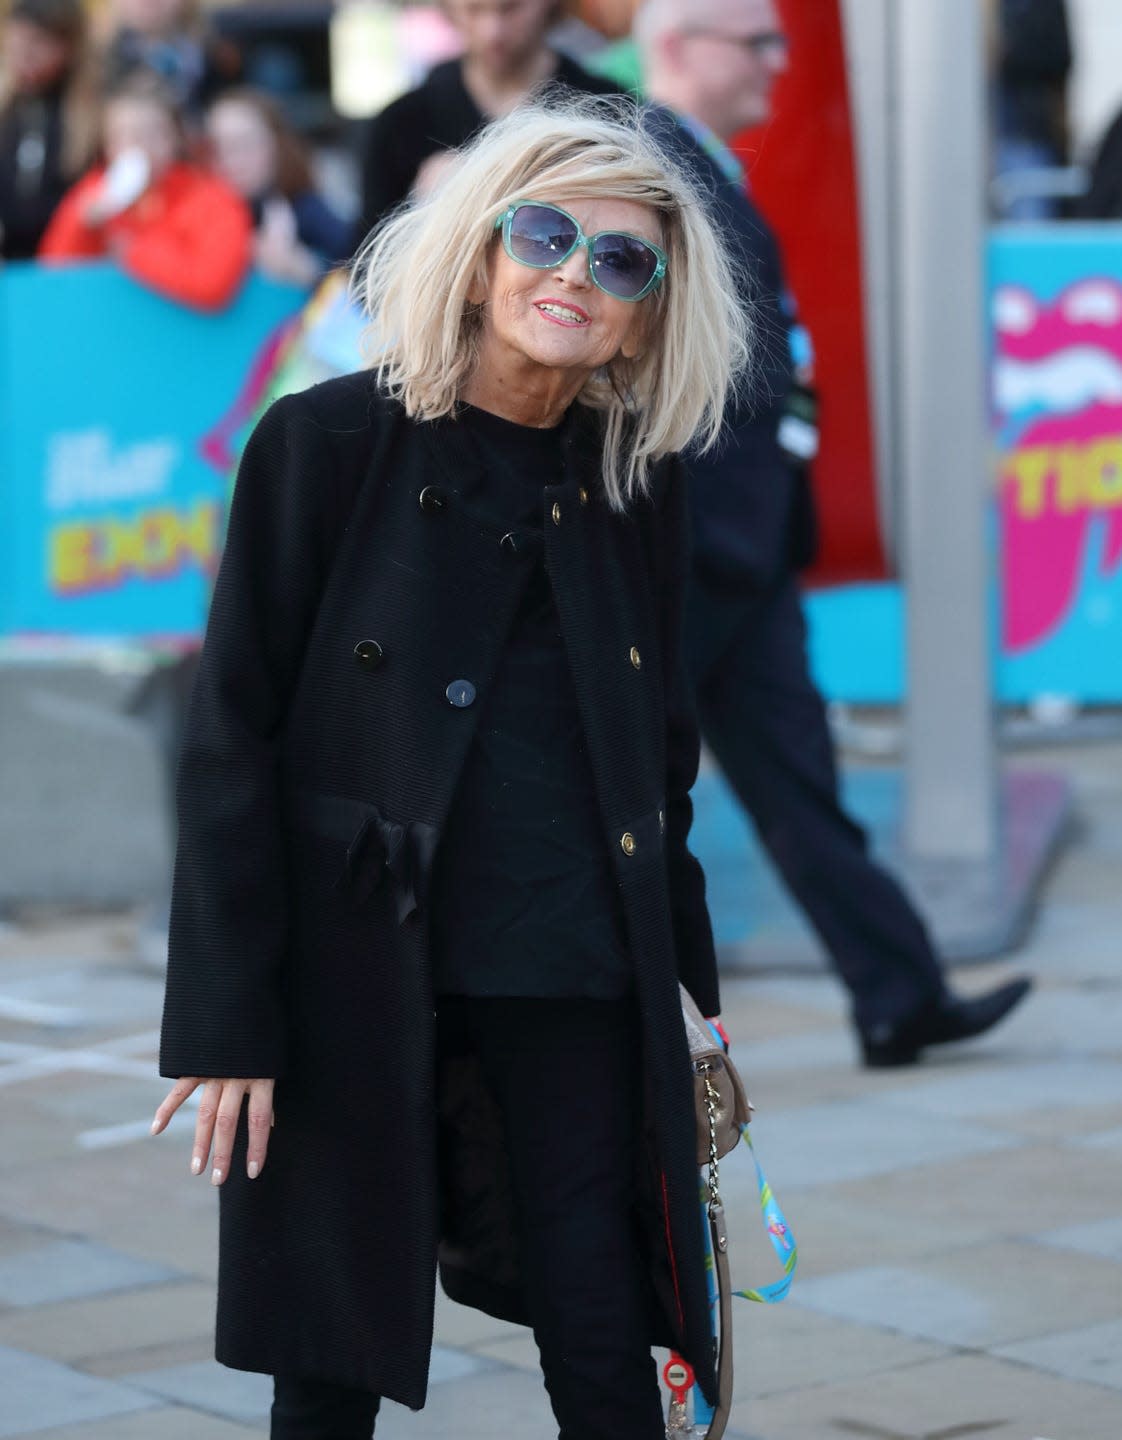 annie nightingale pictured walking down the street in london wearing sunglasses and smiling in 2016